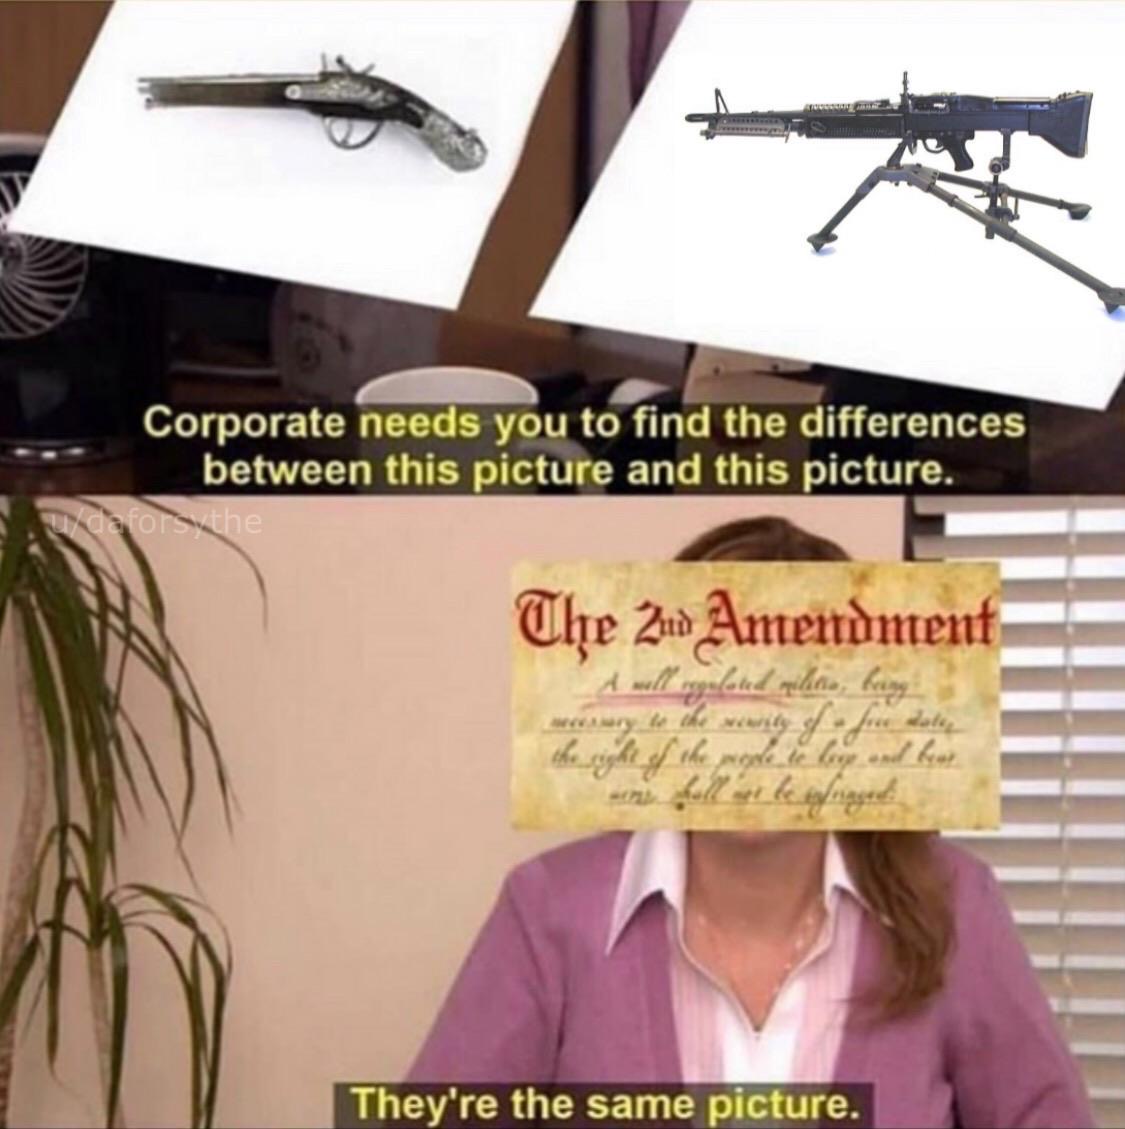 shqip memes - Corporate needs you to find the differences between this picture and this picture. udaforsvthe The Zid Amendment spaleted militia, being the rolete loend but fall be s aged en They're the same picture.